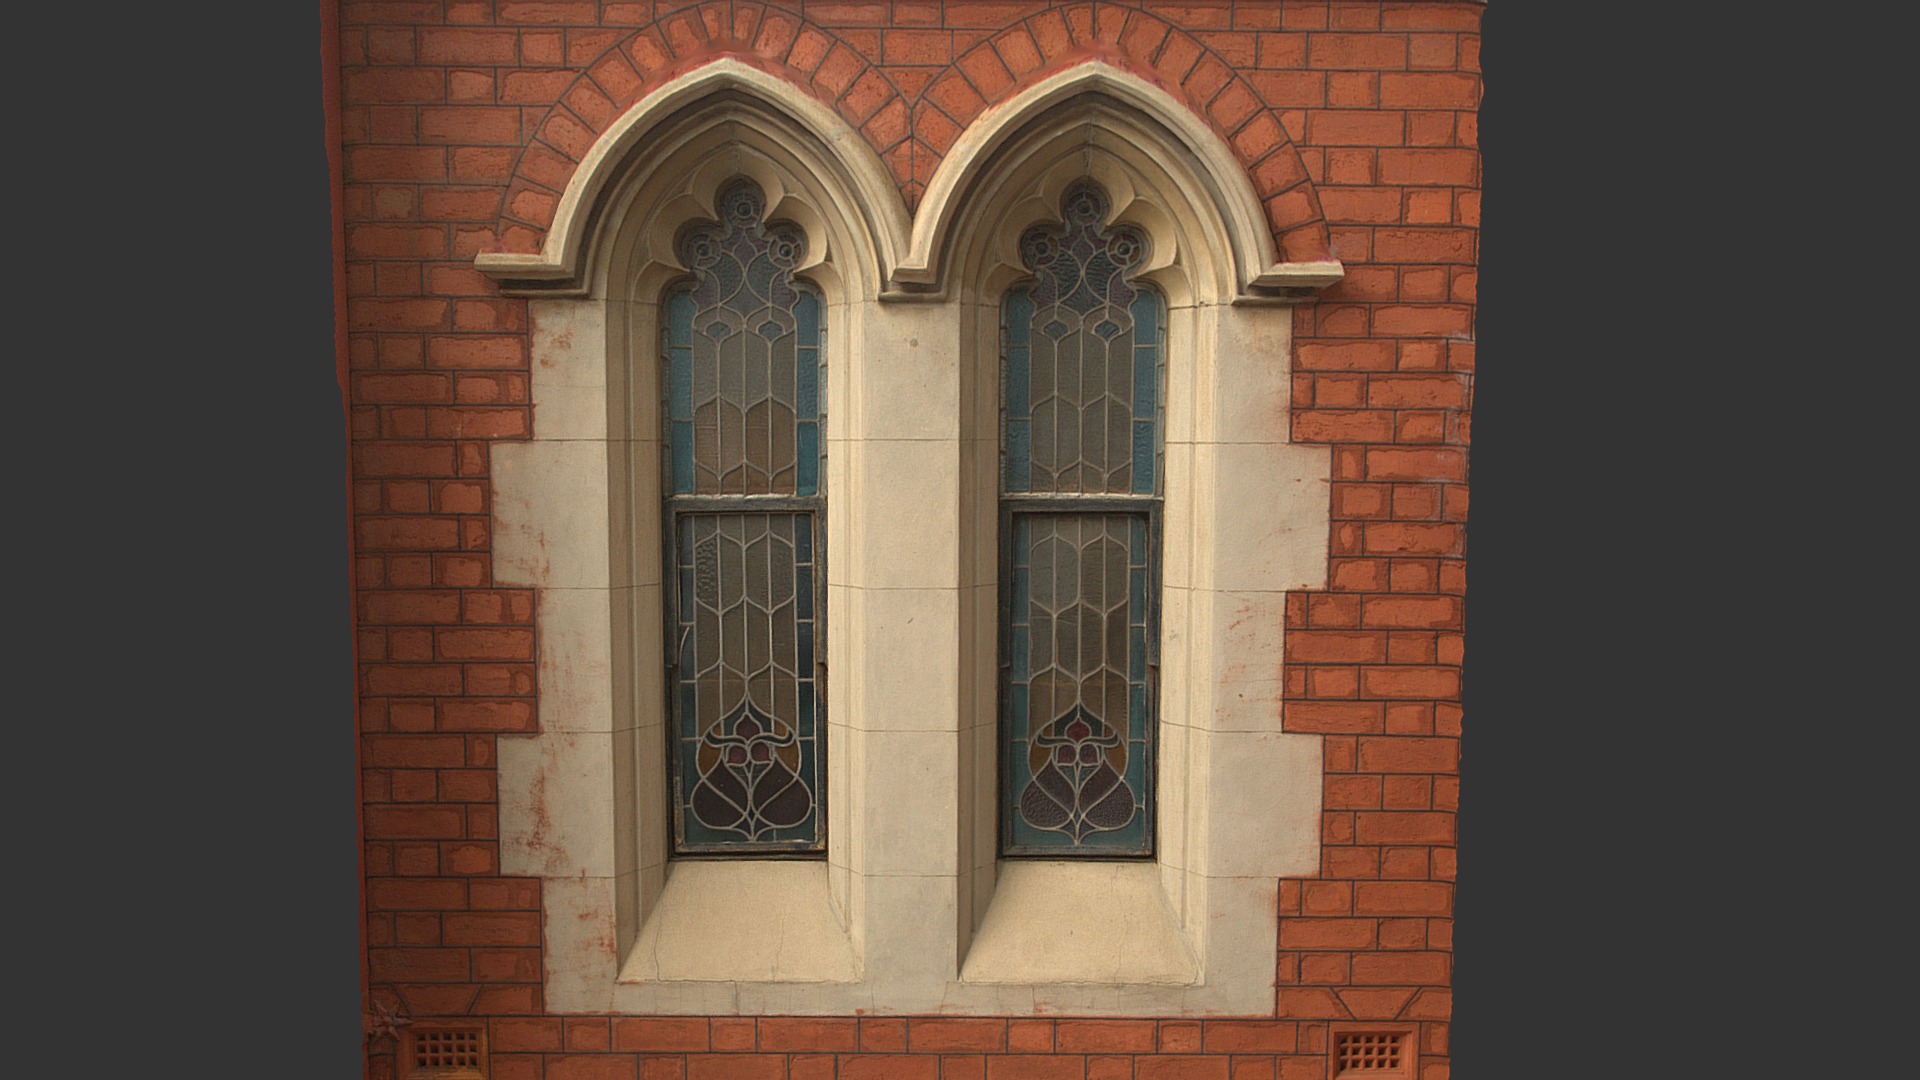 3D model Church window - This is a 3D model of the Church window. The 3D model is about a brick building with a large arched window.